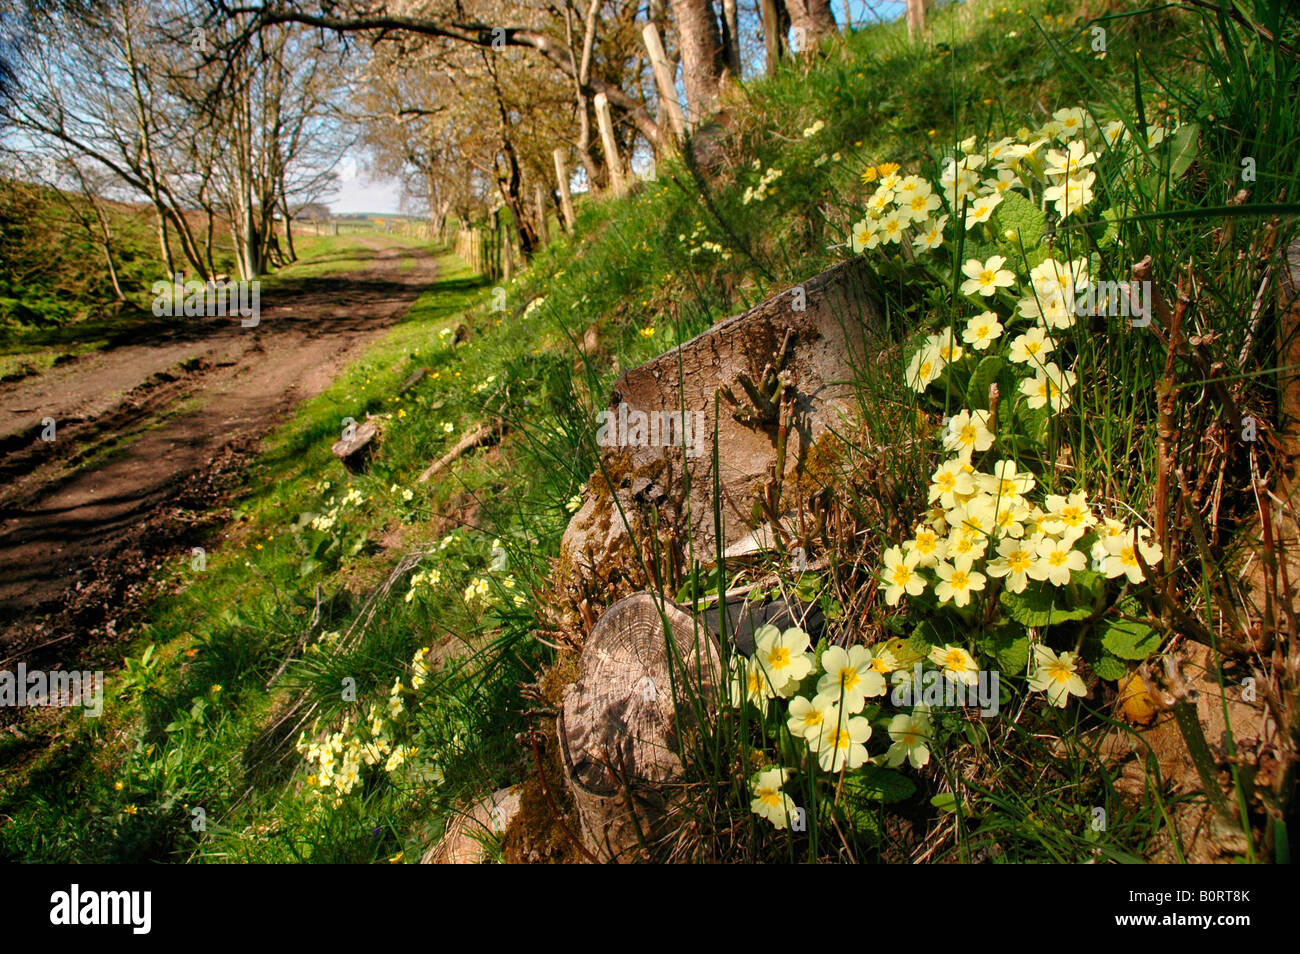 Primroses grow on the bank of a country lane Stock Photo